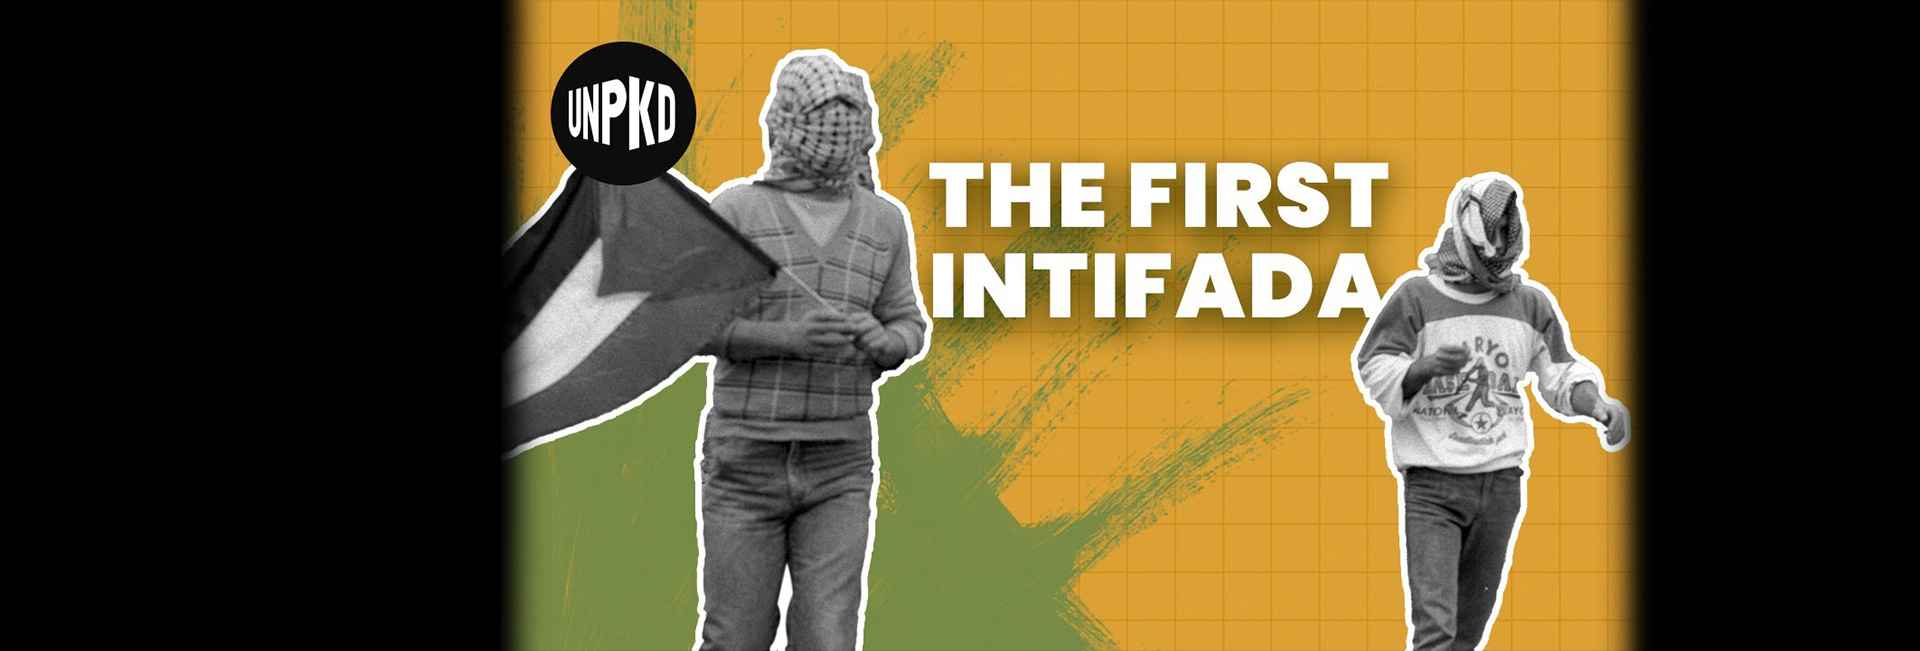 The First Intifada: When Non-Violent Protests Turned Violent